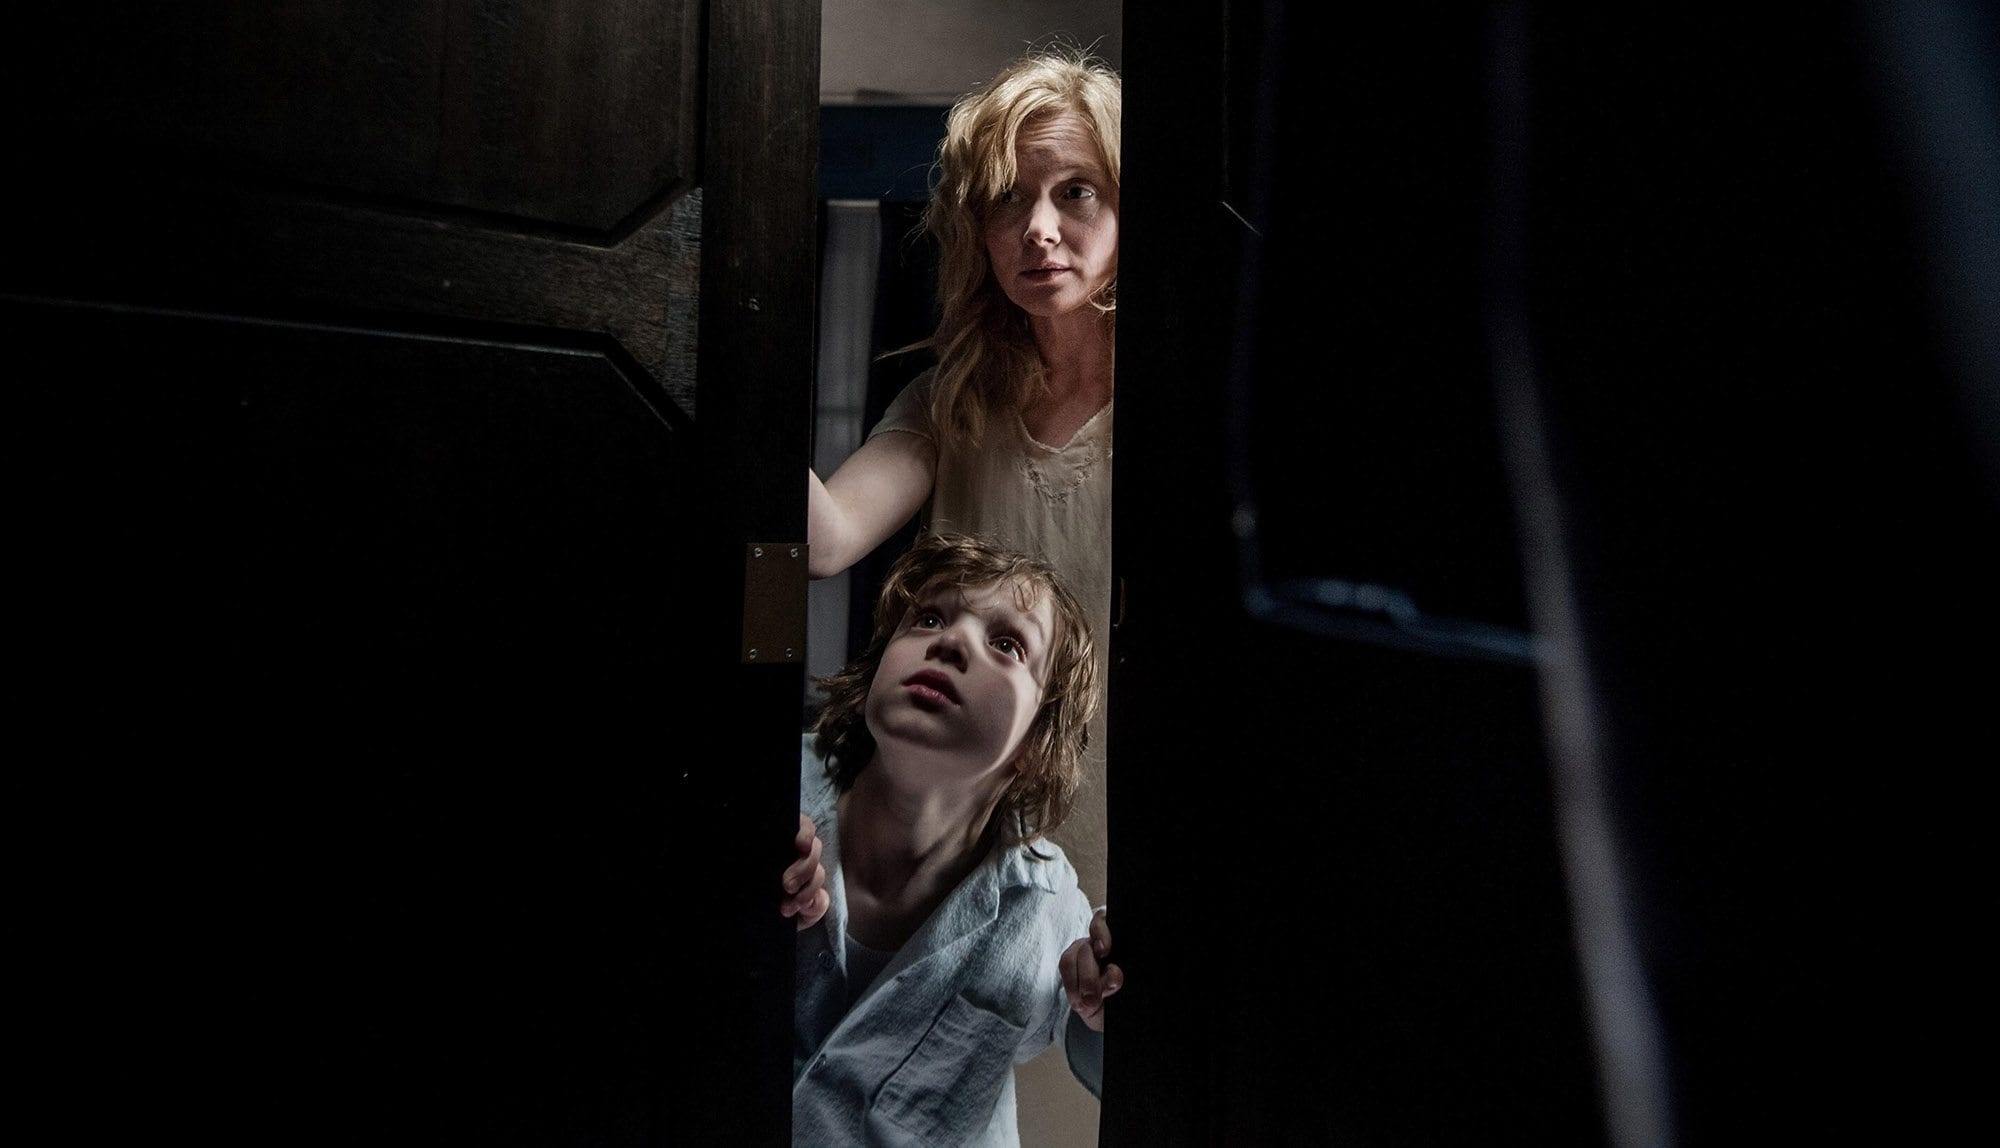 Imbibe a dose of terror with our top ten most brutal entries from the horror genre available on Netflix, from ‘The Babadook’ to ‘The Autopsy of Jane Doe’.